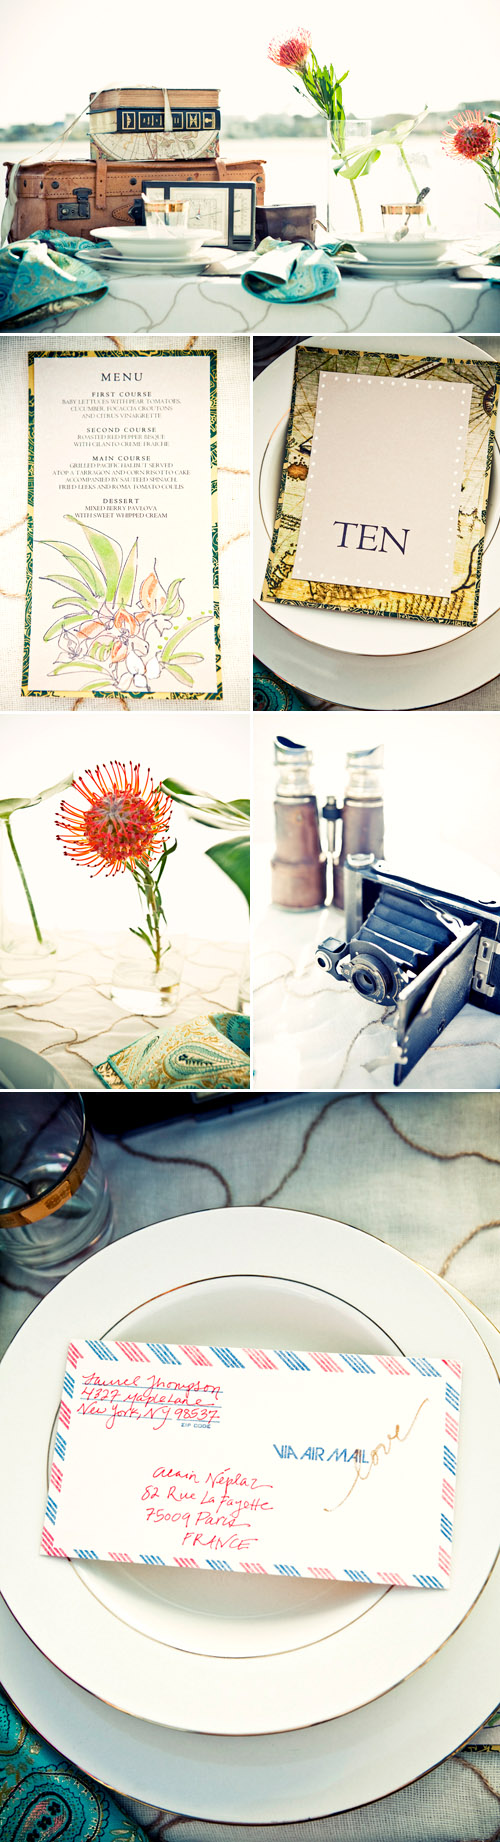 World traveler themed wedding table top design from Good Life Events, images by Llane Weddings